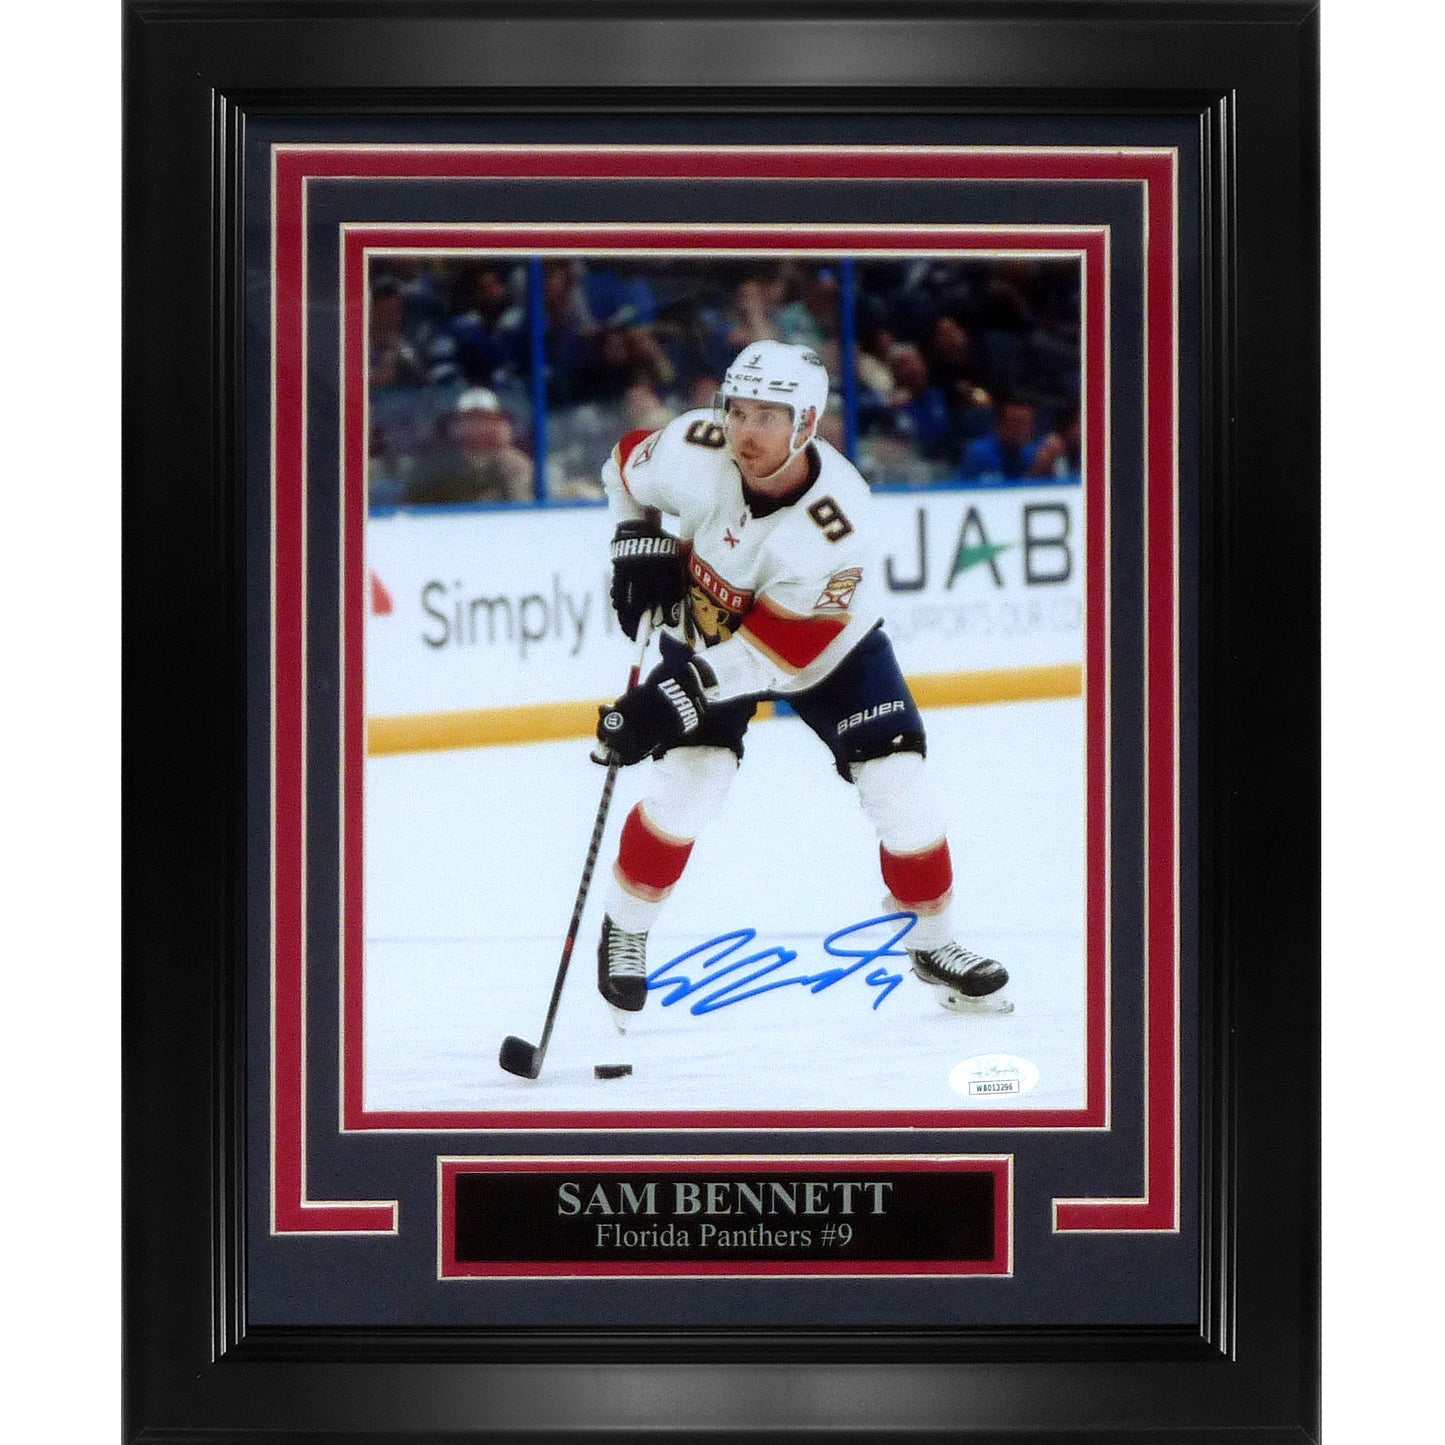 Sam Bennett Autographed Florida Panthers Deluxe Framed 8x10 Photo